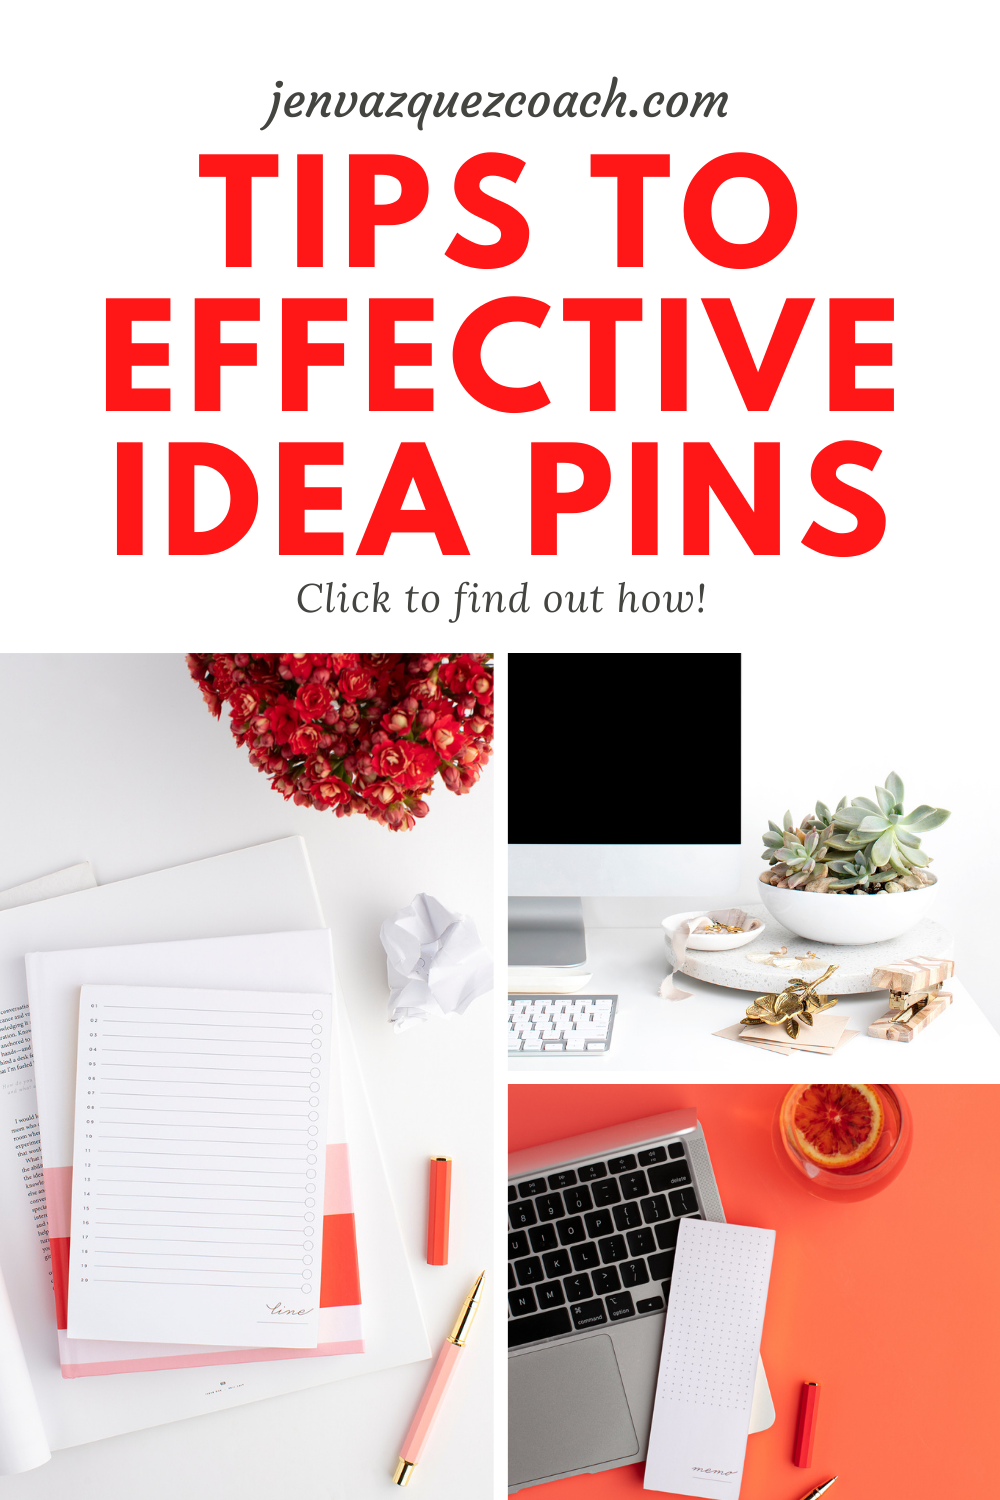 tips to effective idea pins for pinterest 